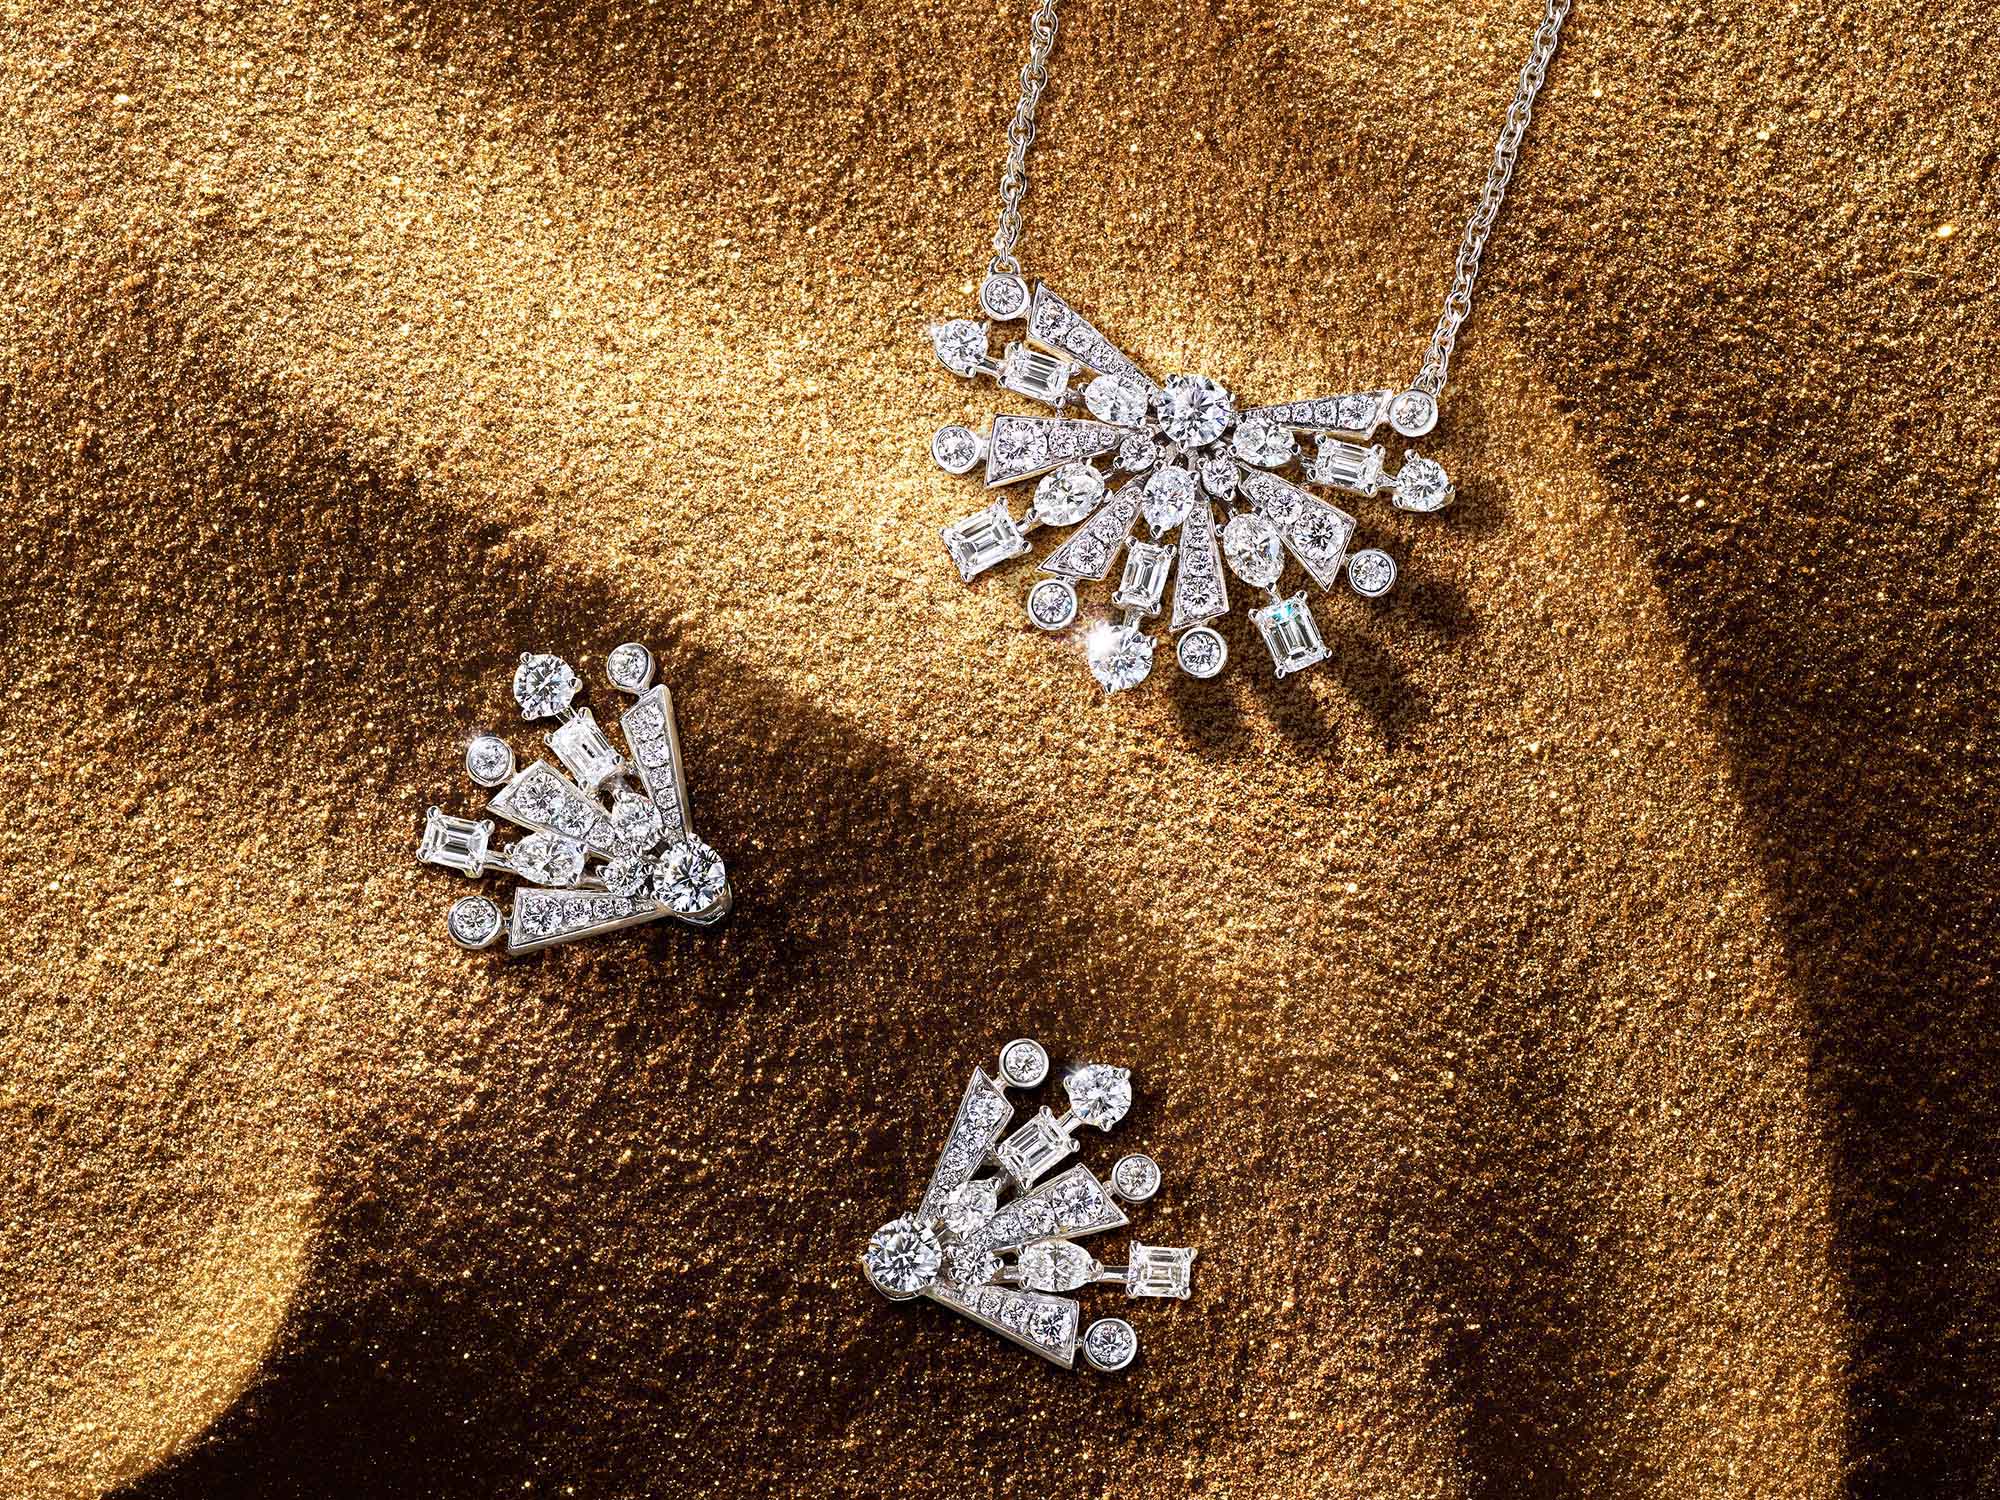 The Graff New Dawn diamond earrings and pendant from the Tribal jewellery collection, on sand